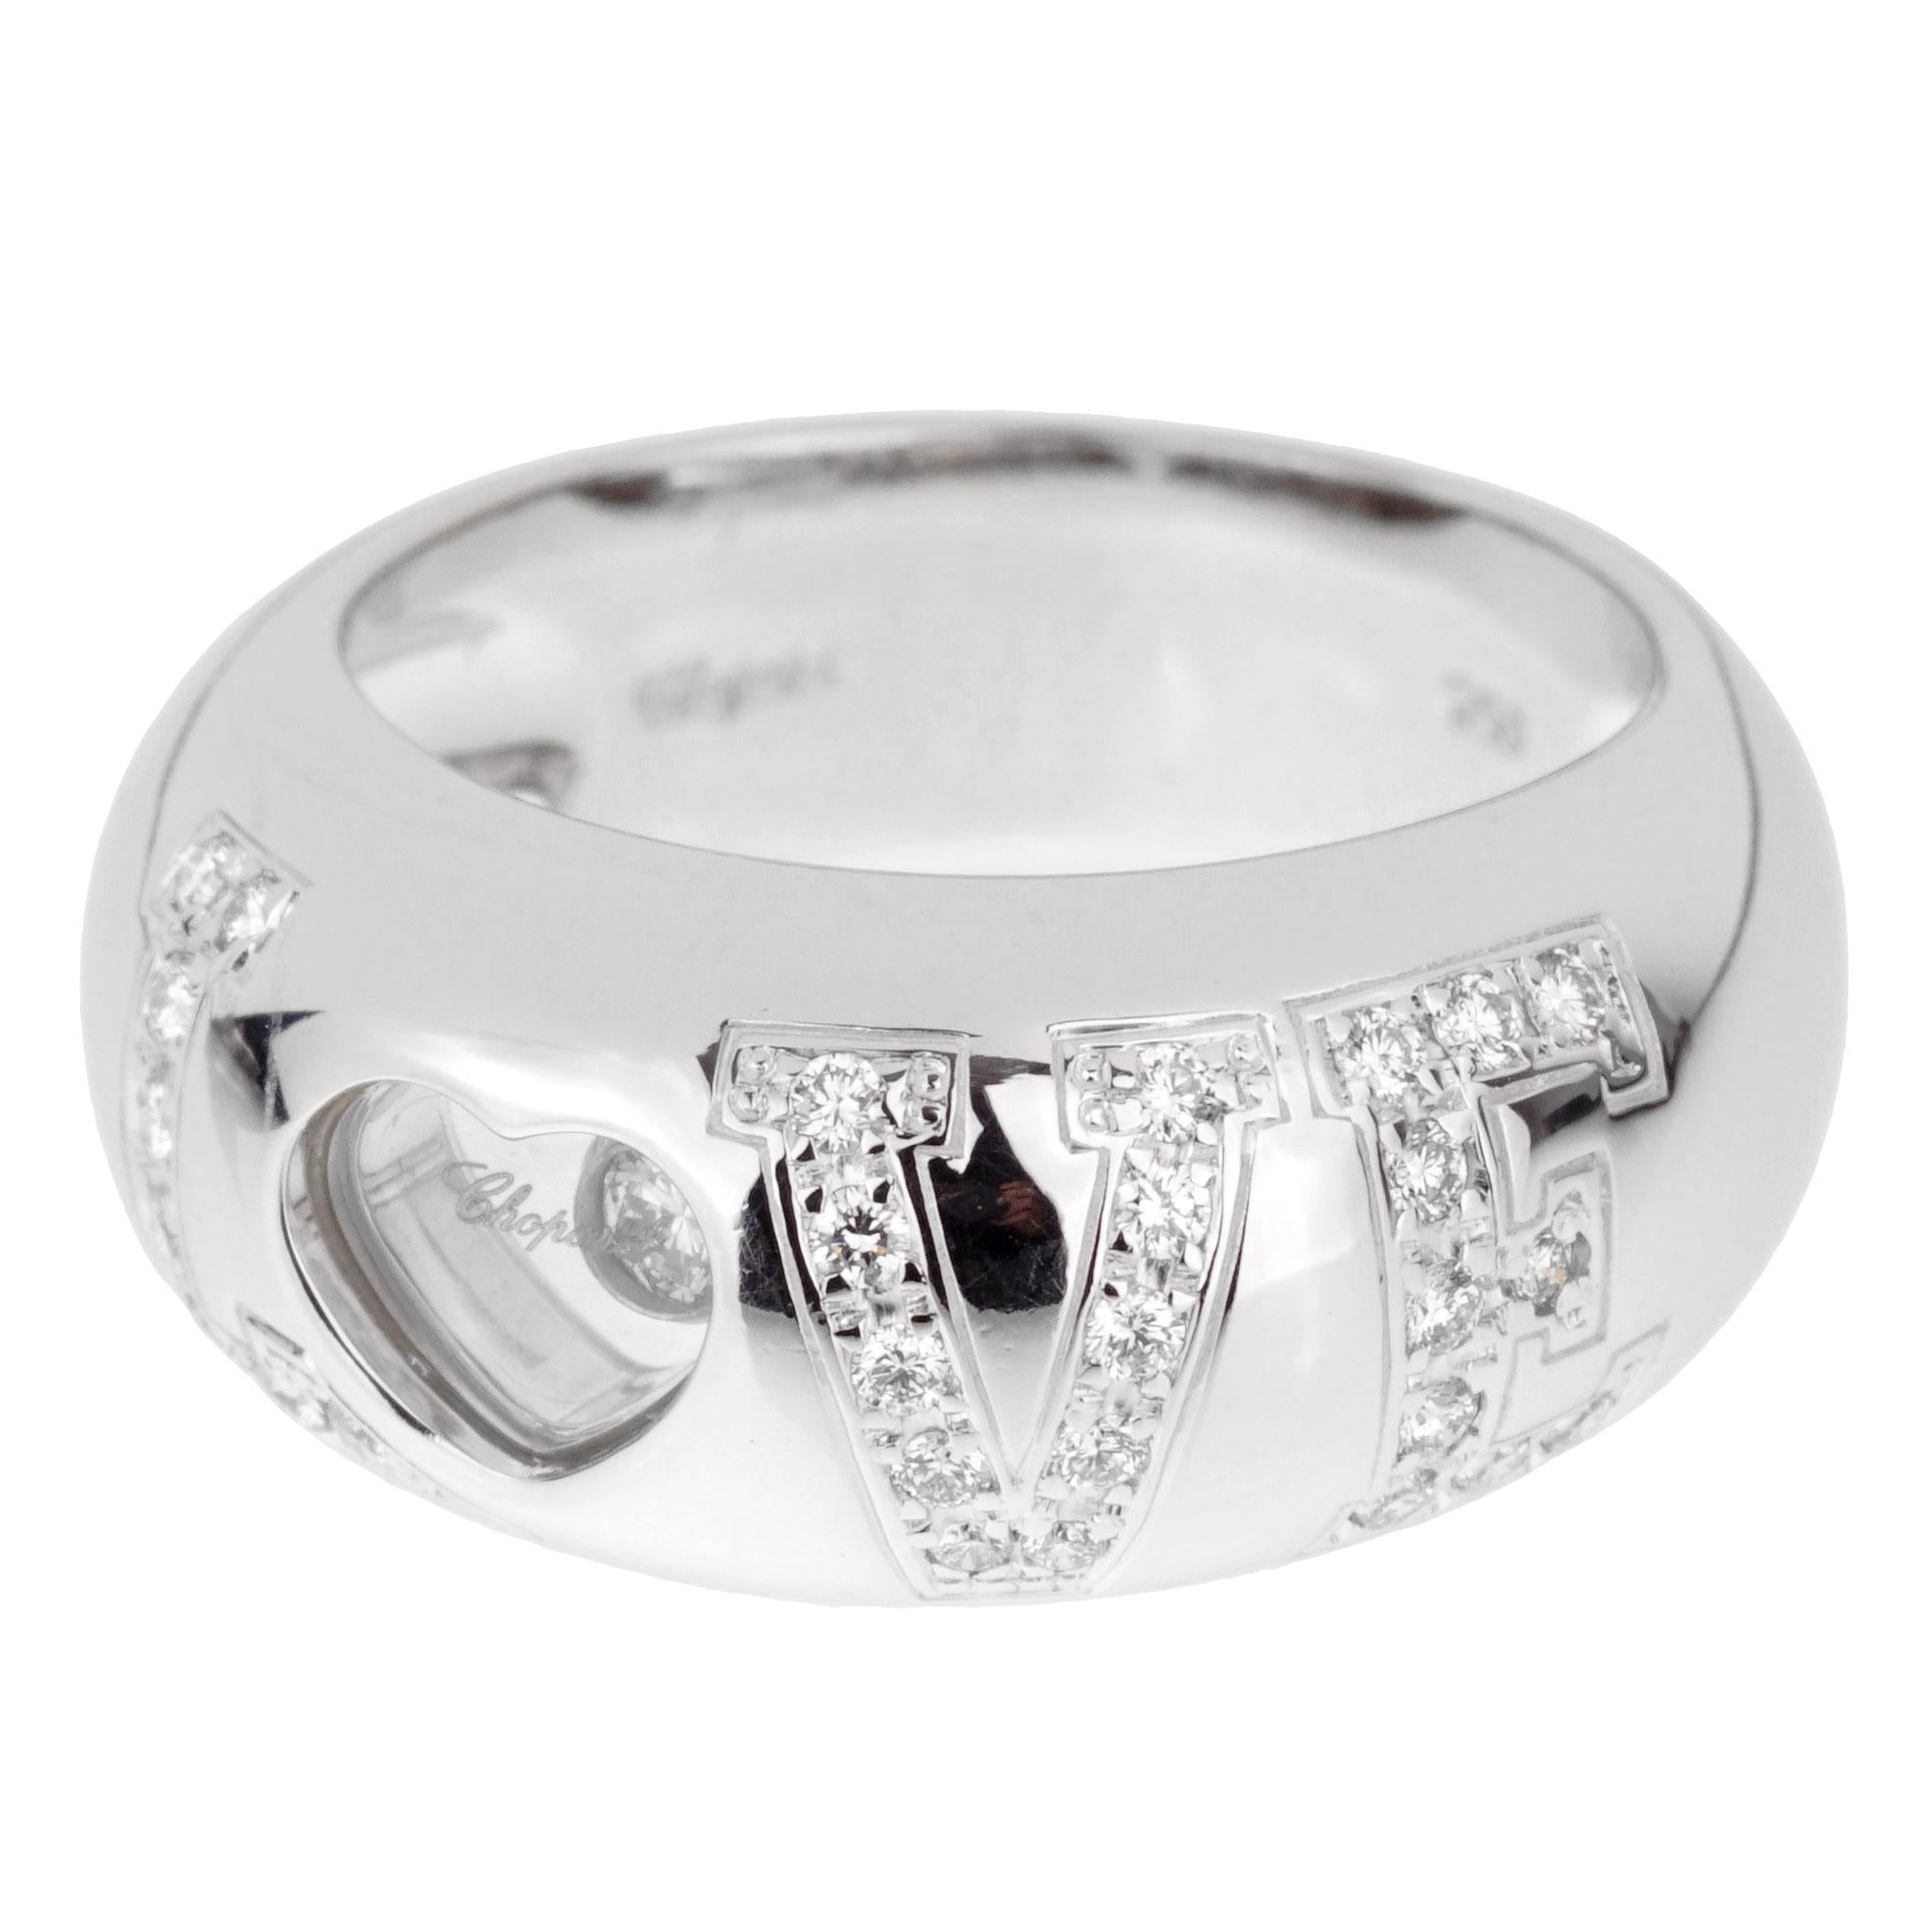 A fabulous Chopard happy diamond ring adorned with round brilliant cut diamonds in shimmering 18k white gold. The ring measures a size 4 1/2 and can be resized.